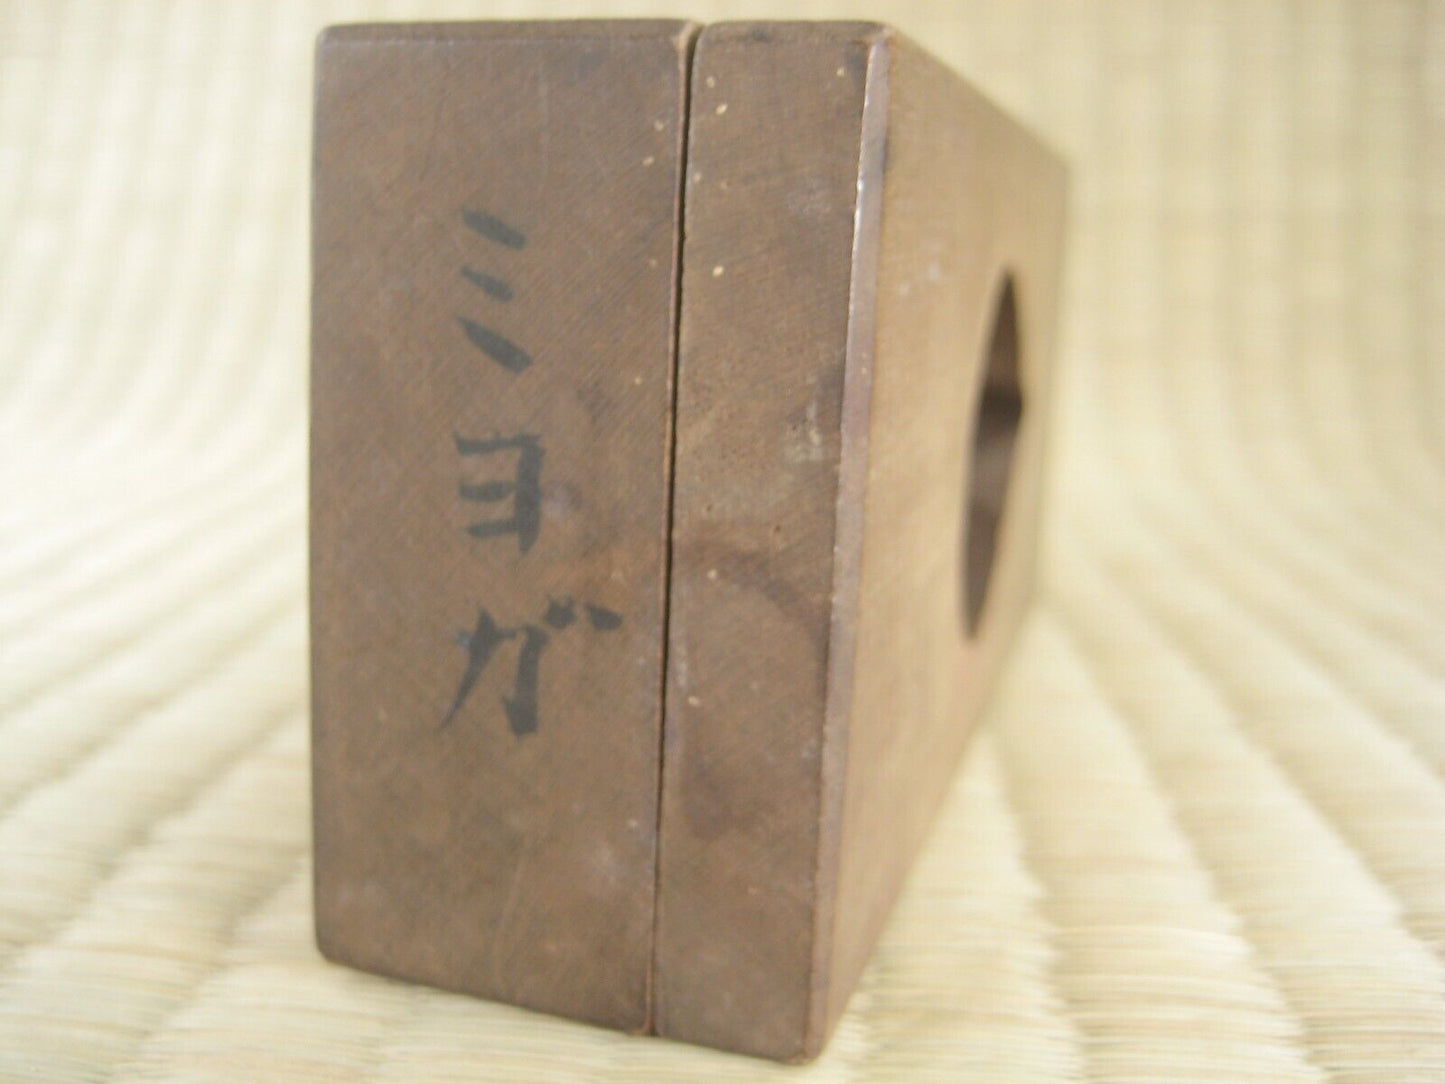 Vintage Japanese Hand Carved Wooden Kashigata Cake Mold Bamboo Sprout 2.25"X5"